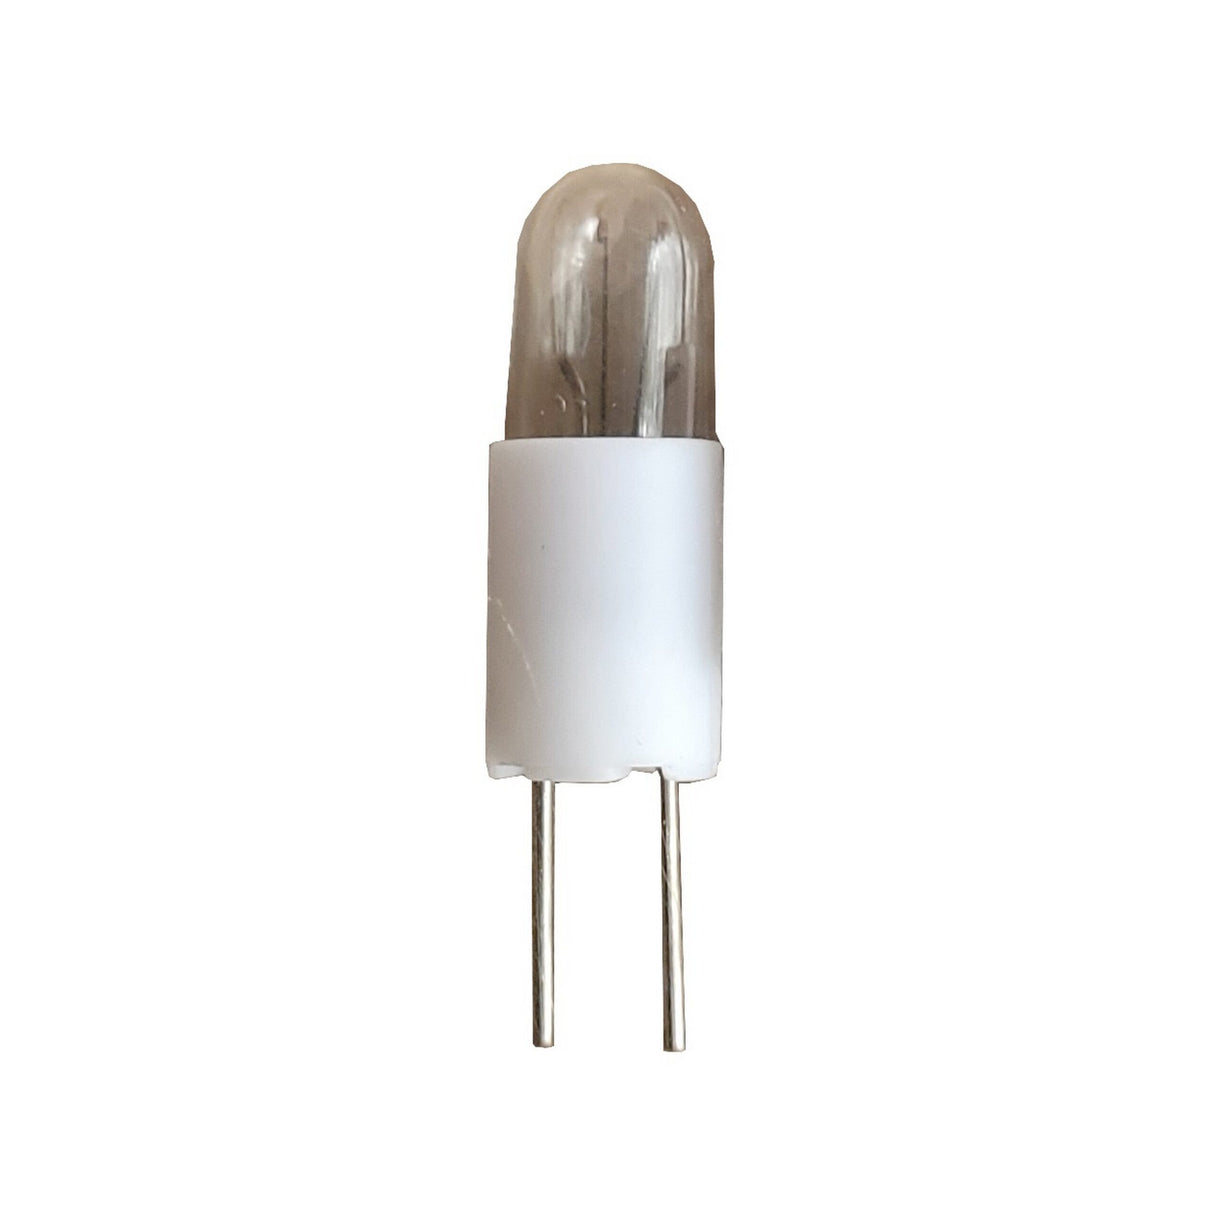 Clear-Com 390047Z Bulb, T-1 3/4 Base, 32 Volt, 22mA, Limited Availability for MS-232, RM-220